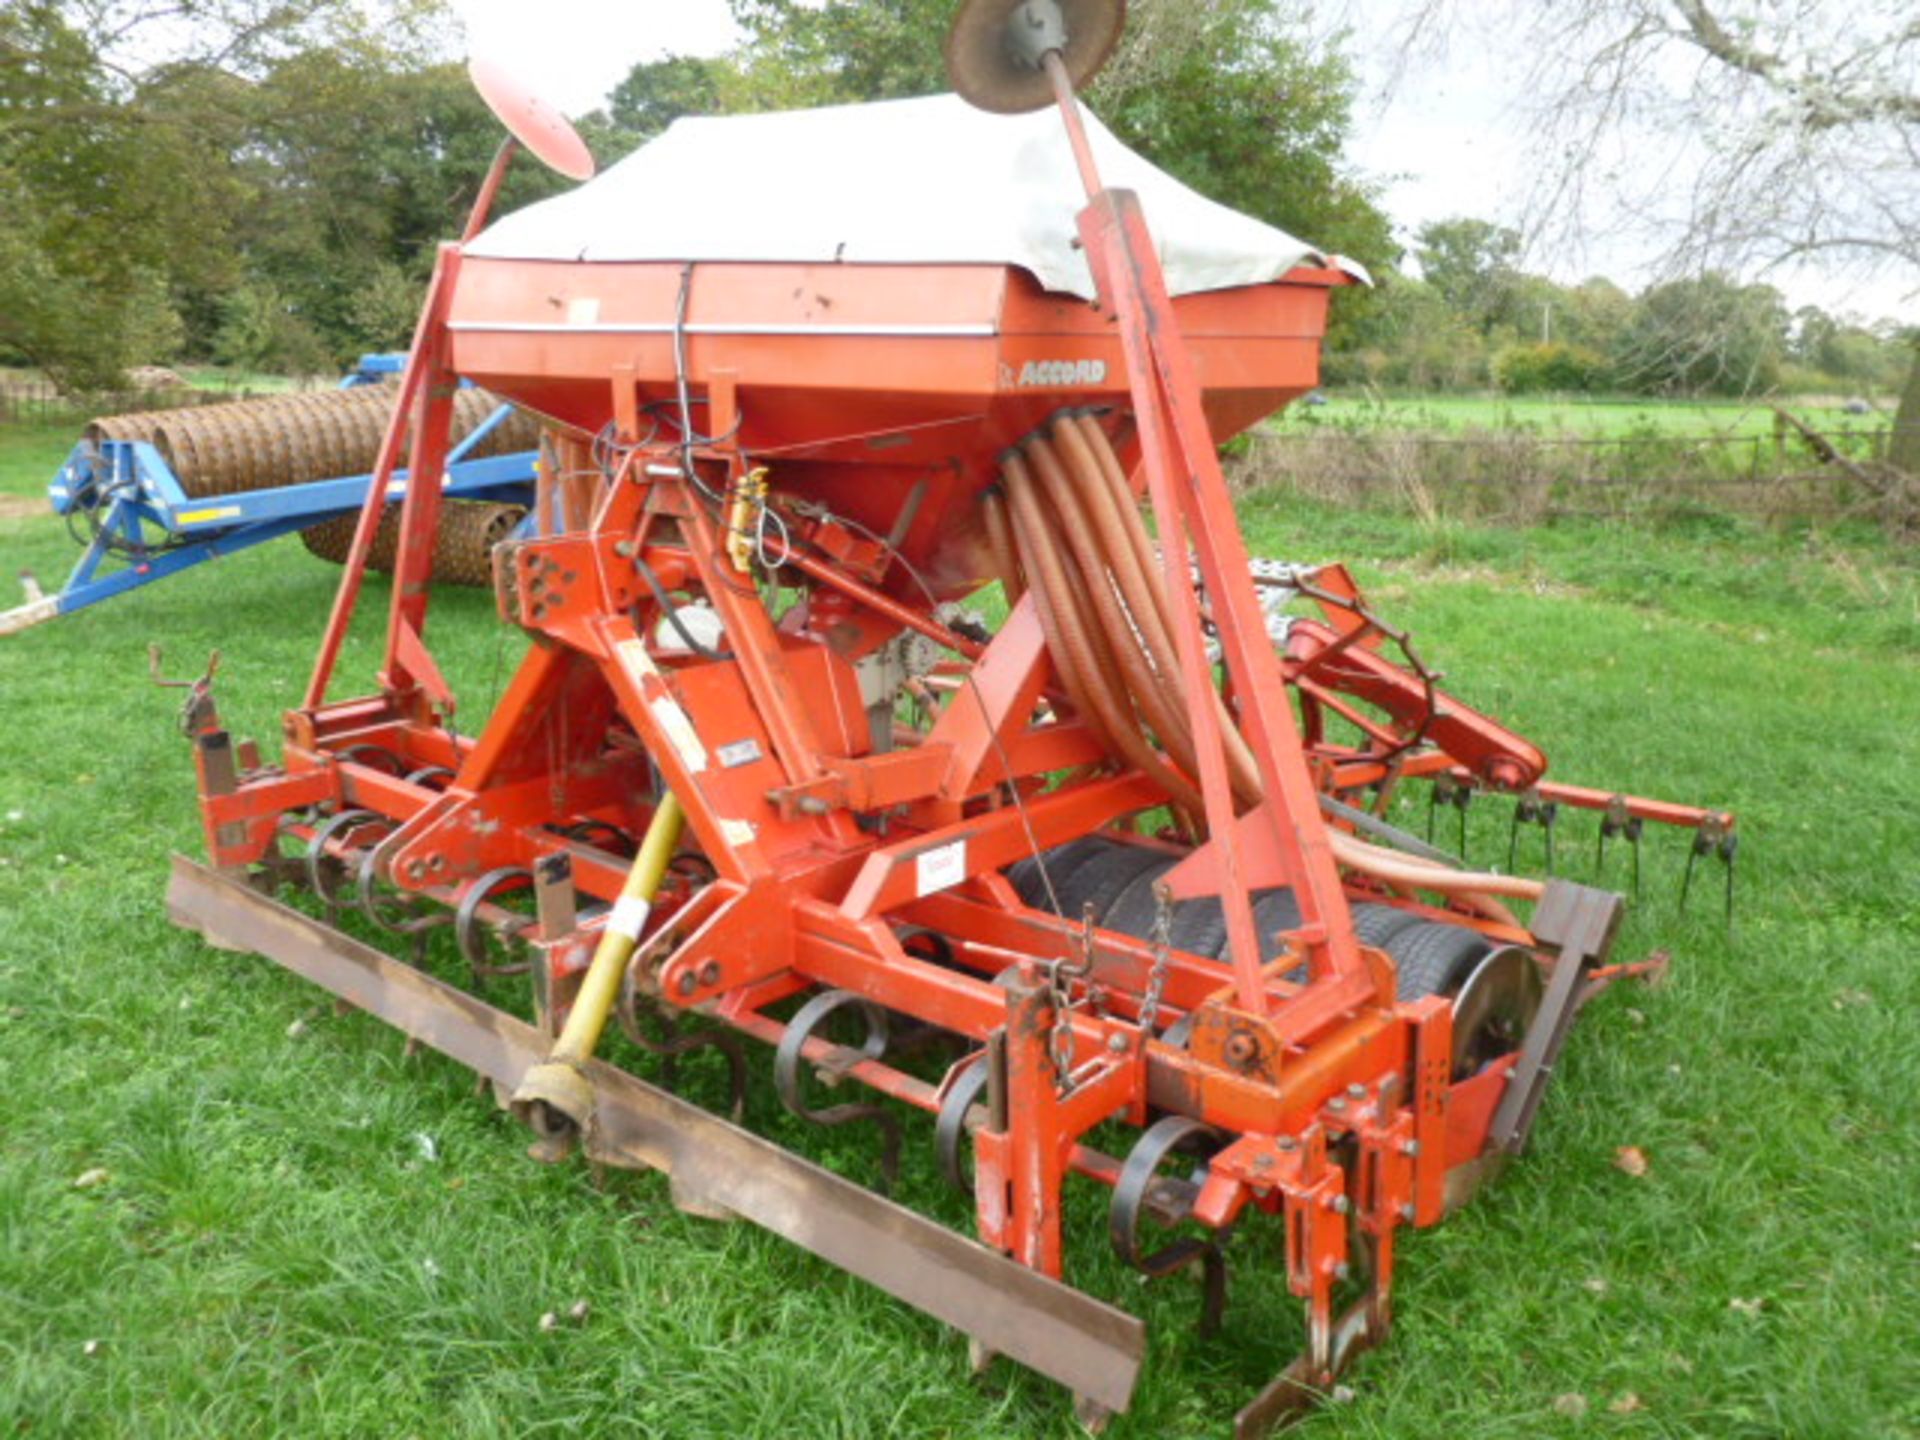 Farmforce 3m Accord Drill with spring tines and tyre packer